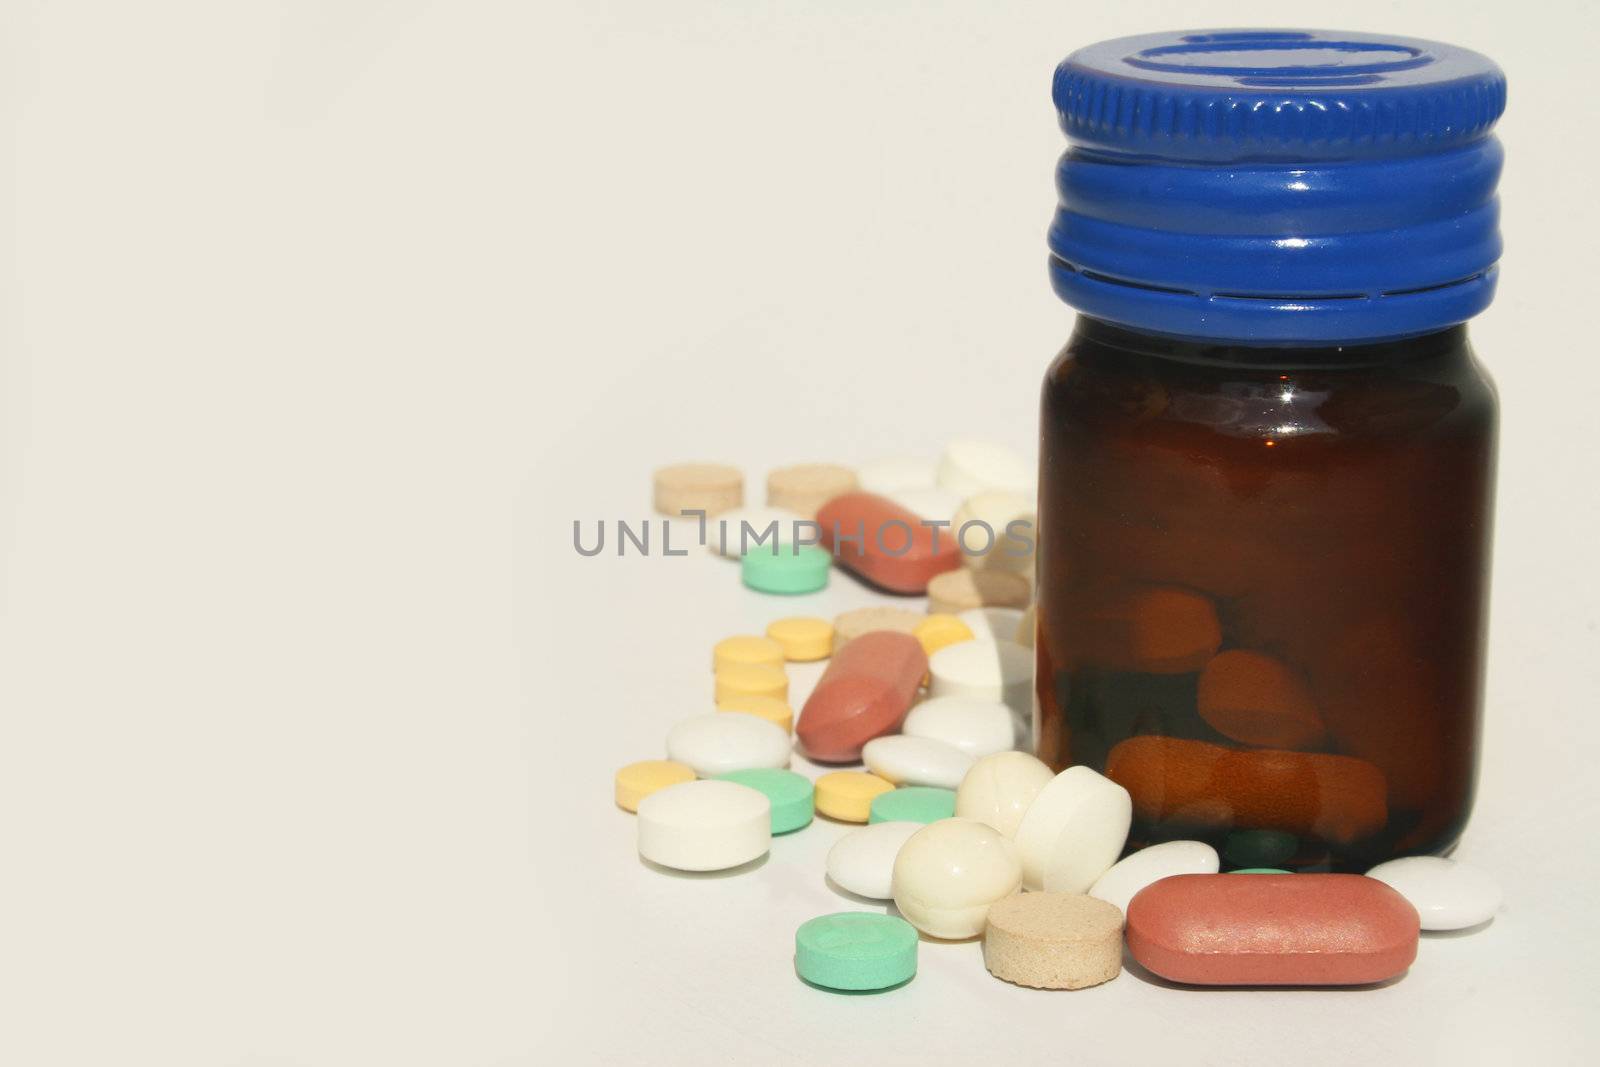 Bottle of pills against white background and ad space on left